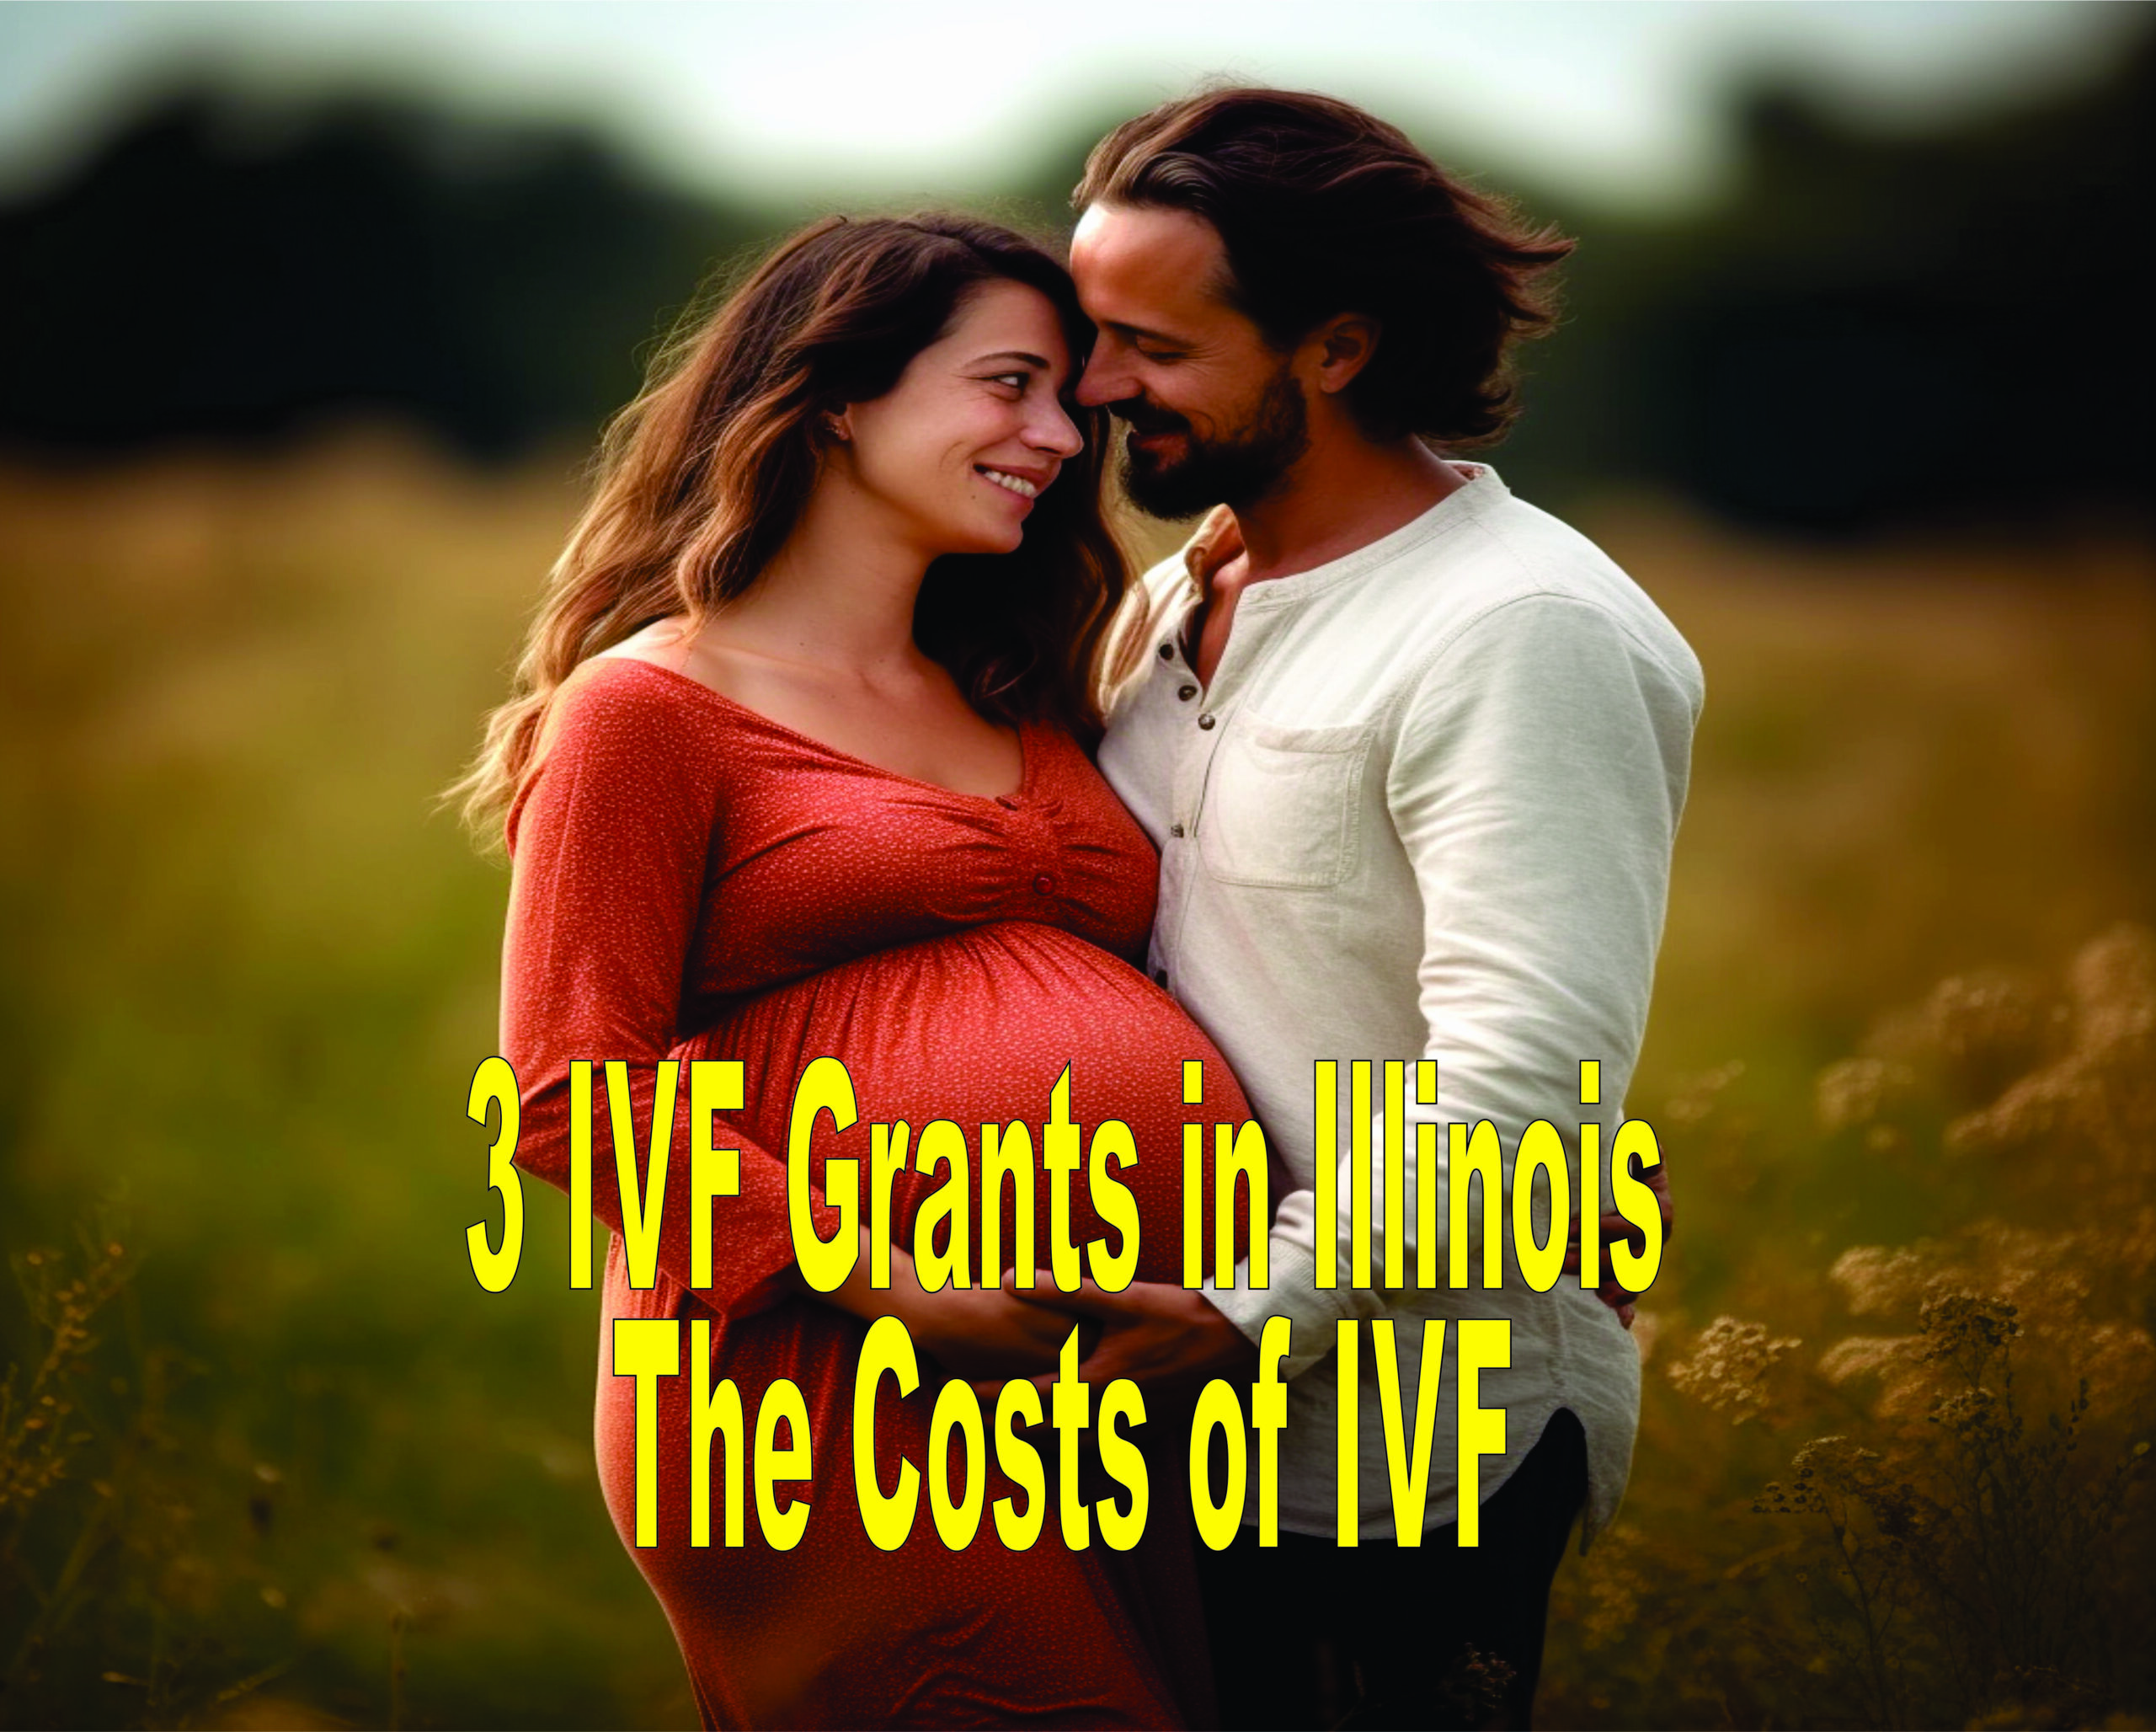 3 Ivf Grants In Illinois The Costs Of Ivf